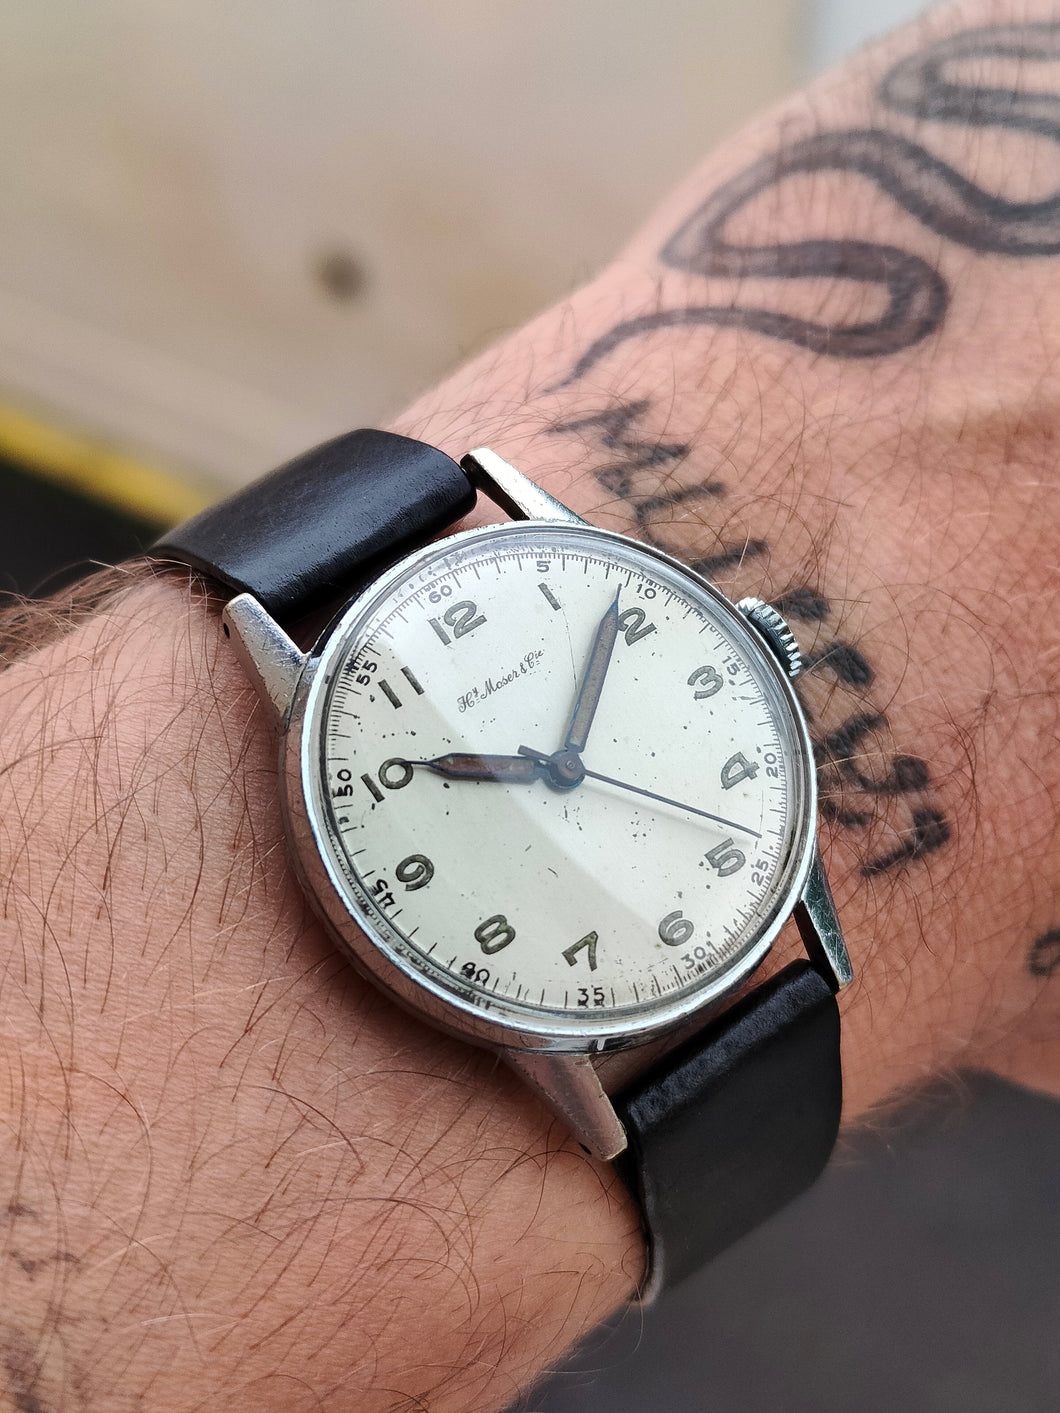 H. Moser and Cie - mamontrevintage